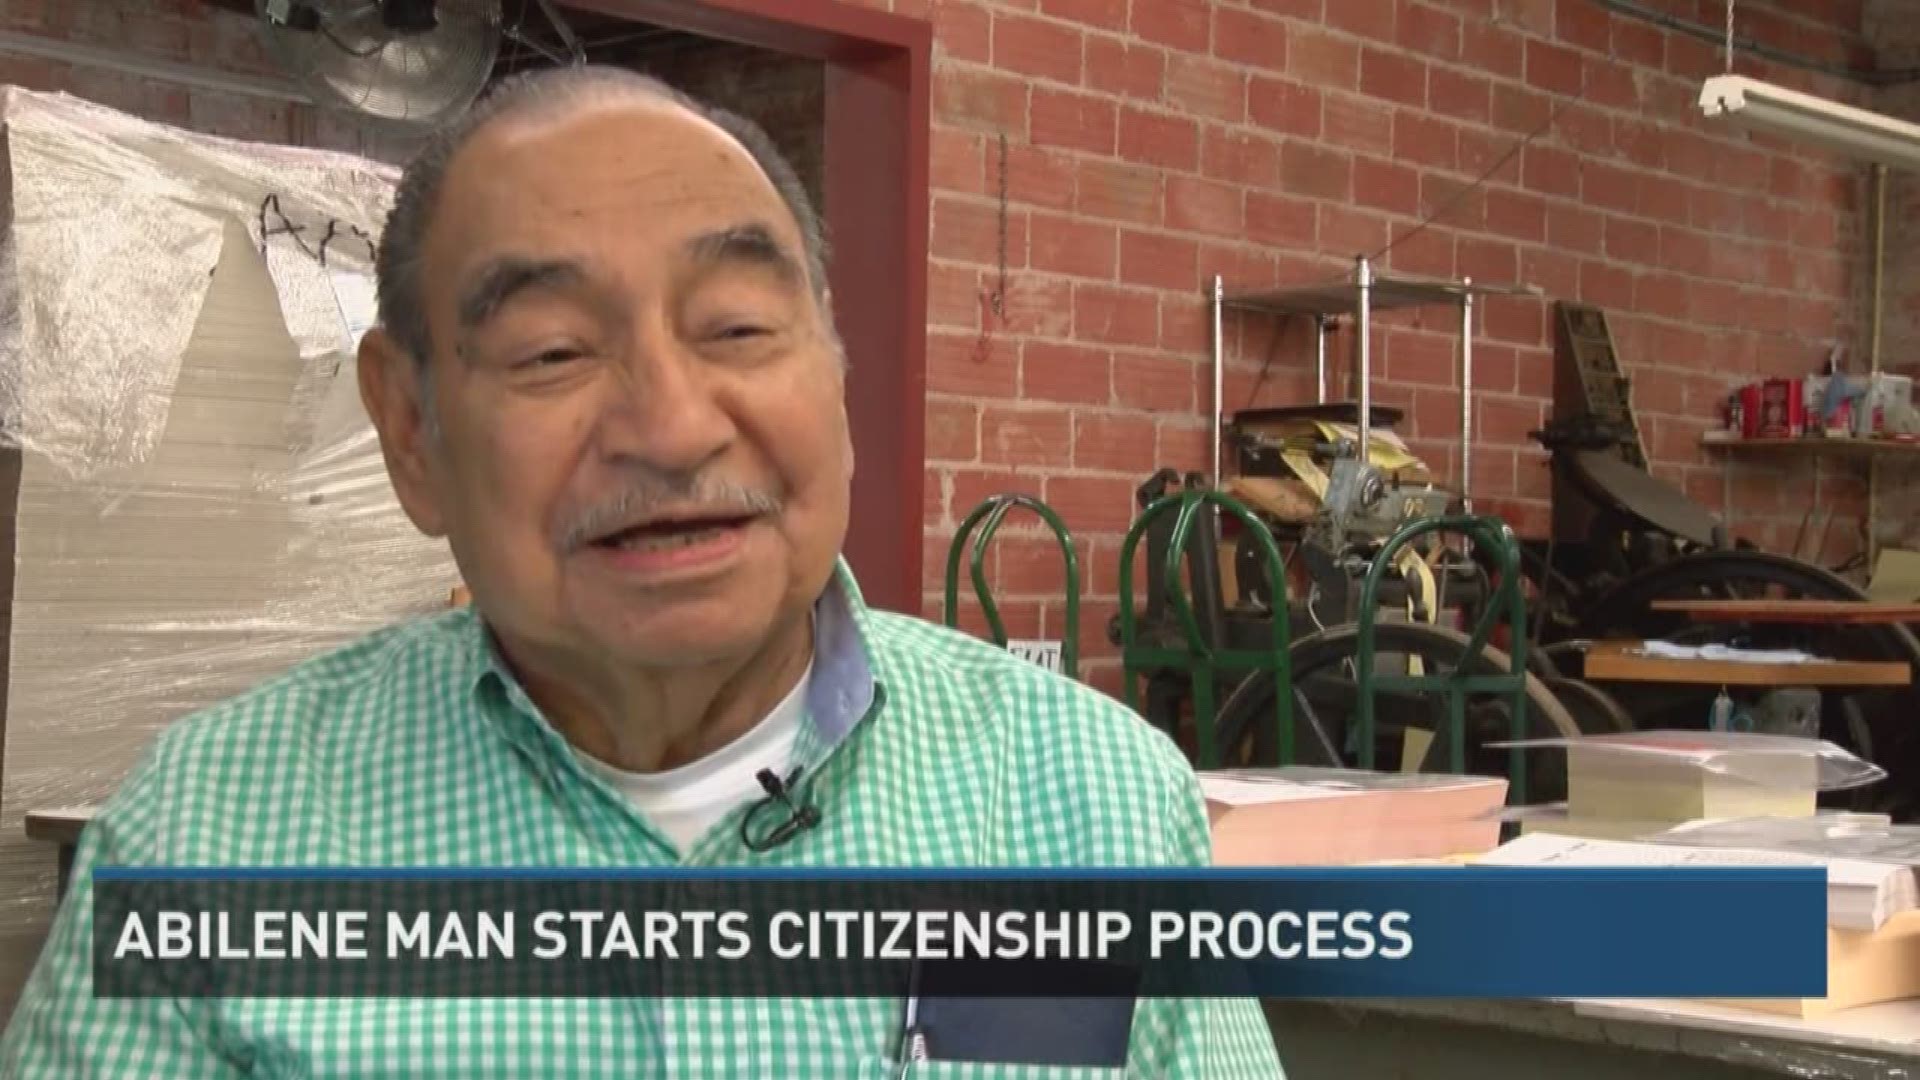 An 88-year-old Abilene man talks about the process he's going through to become an American citizen. Humberto De La Vega tells his story about this lengthy journey.